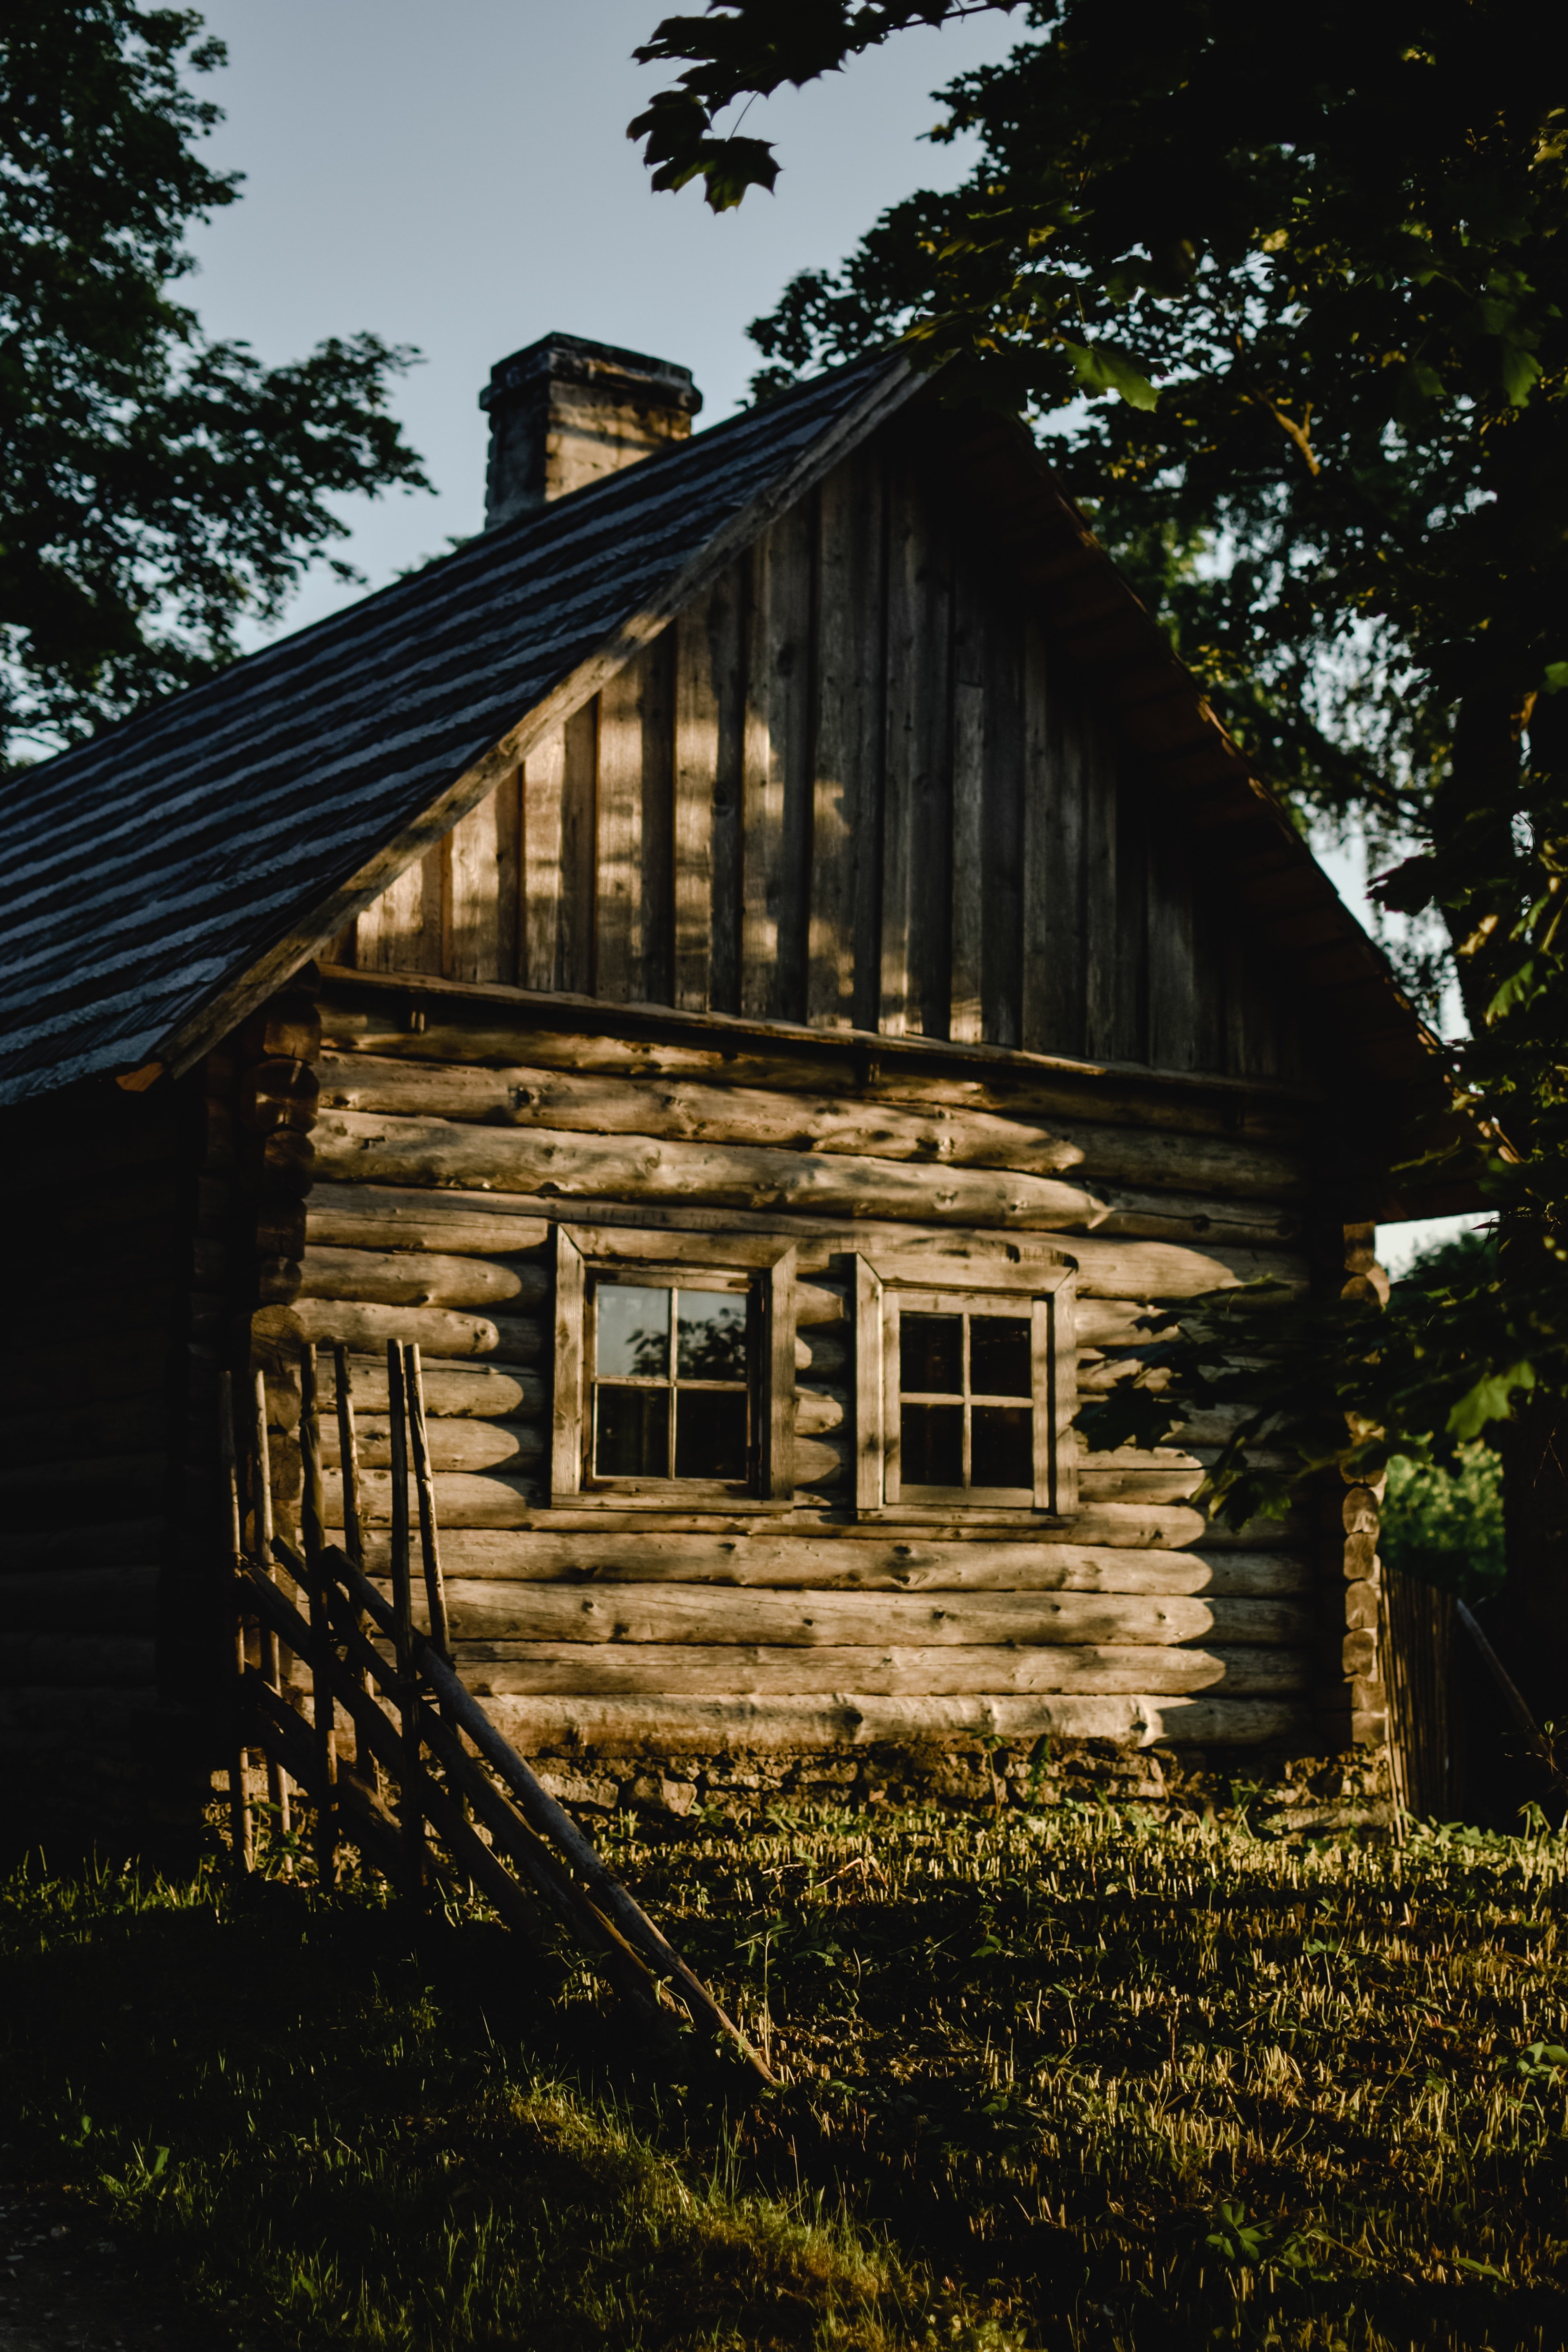 Jack decided to clean up Sally's things at the shack where she lived, hoping to find peace. | Source: Pexels